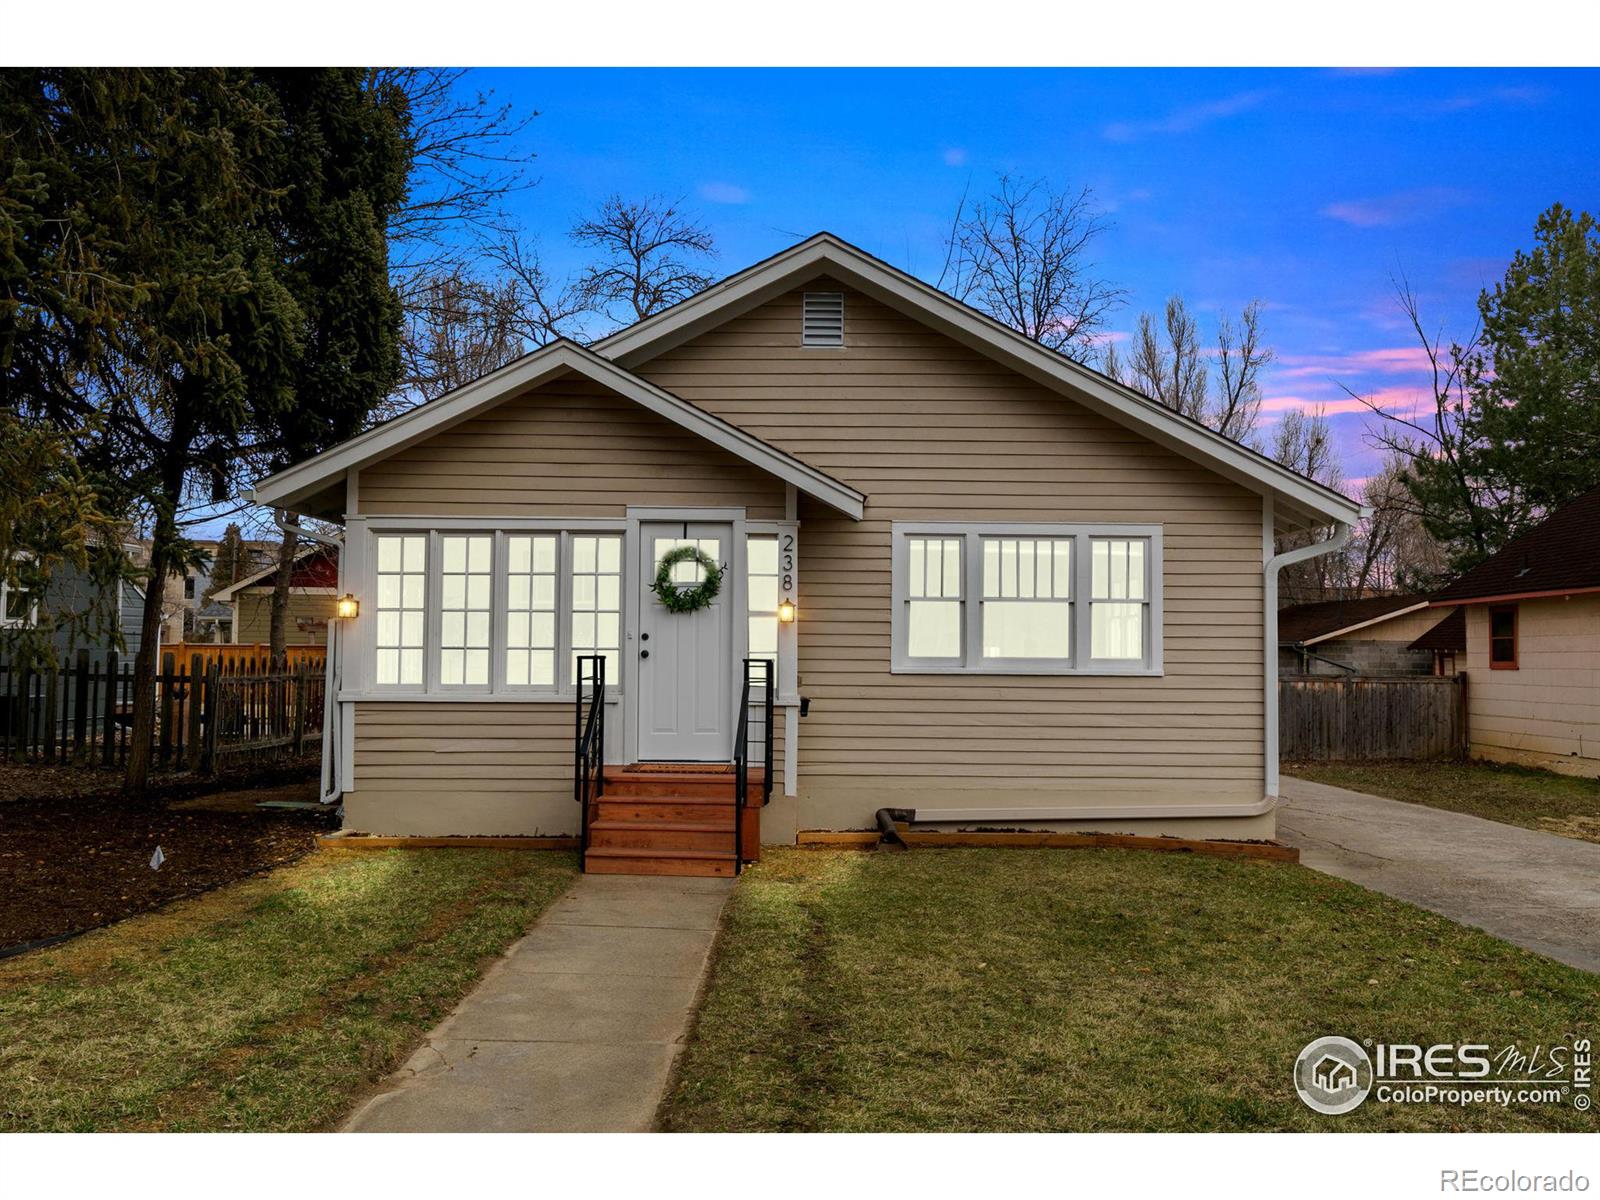 CMA Image for 238 N Sherwood Street,Fort Collins, Colorado